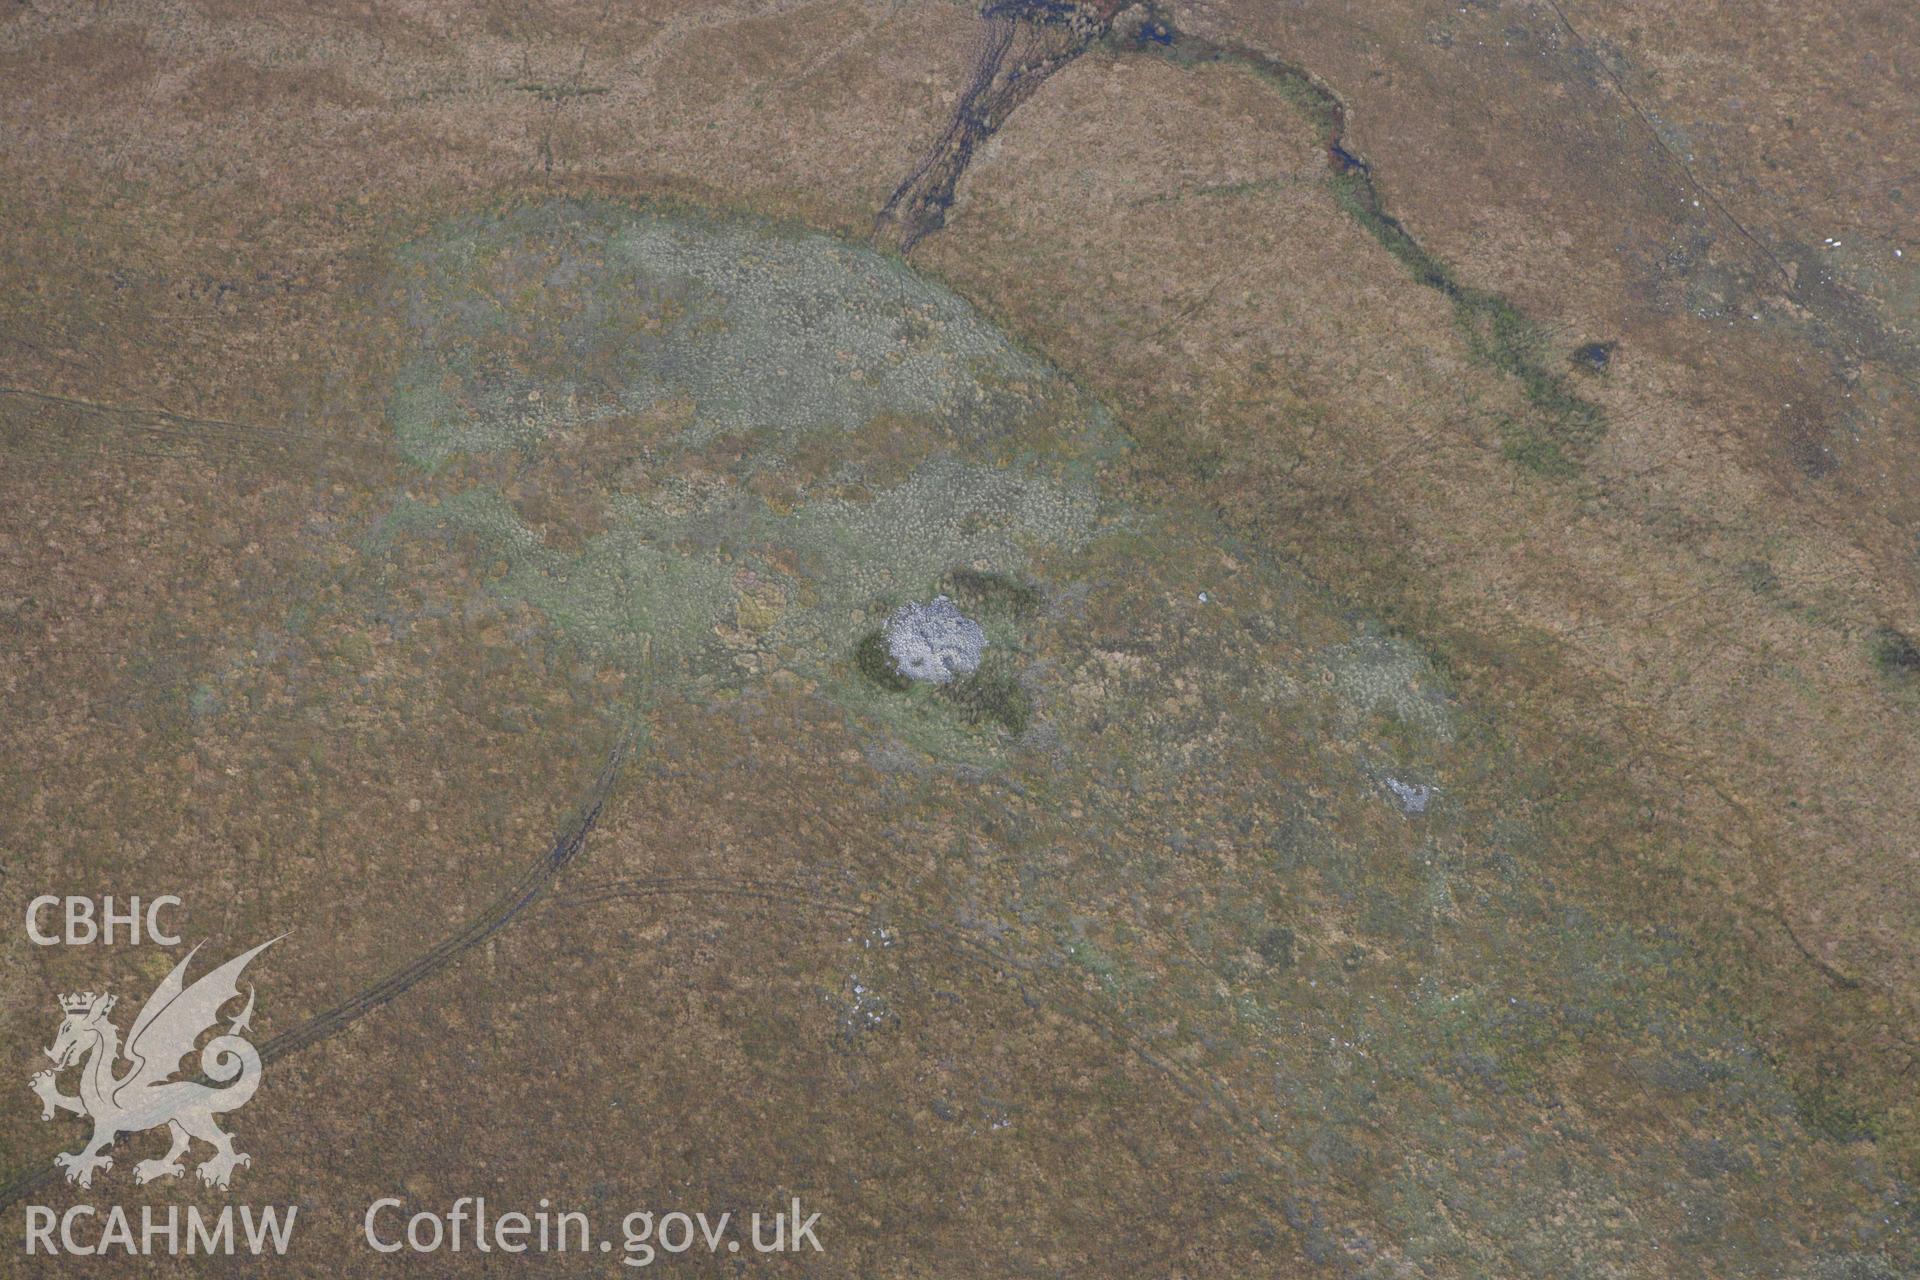 RCAHMW colour oblique aerial photograph of Mynydd-y-Glog Cairn. Taken on 14 October 2009 by Toby Driver